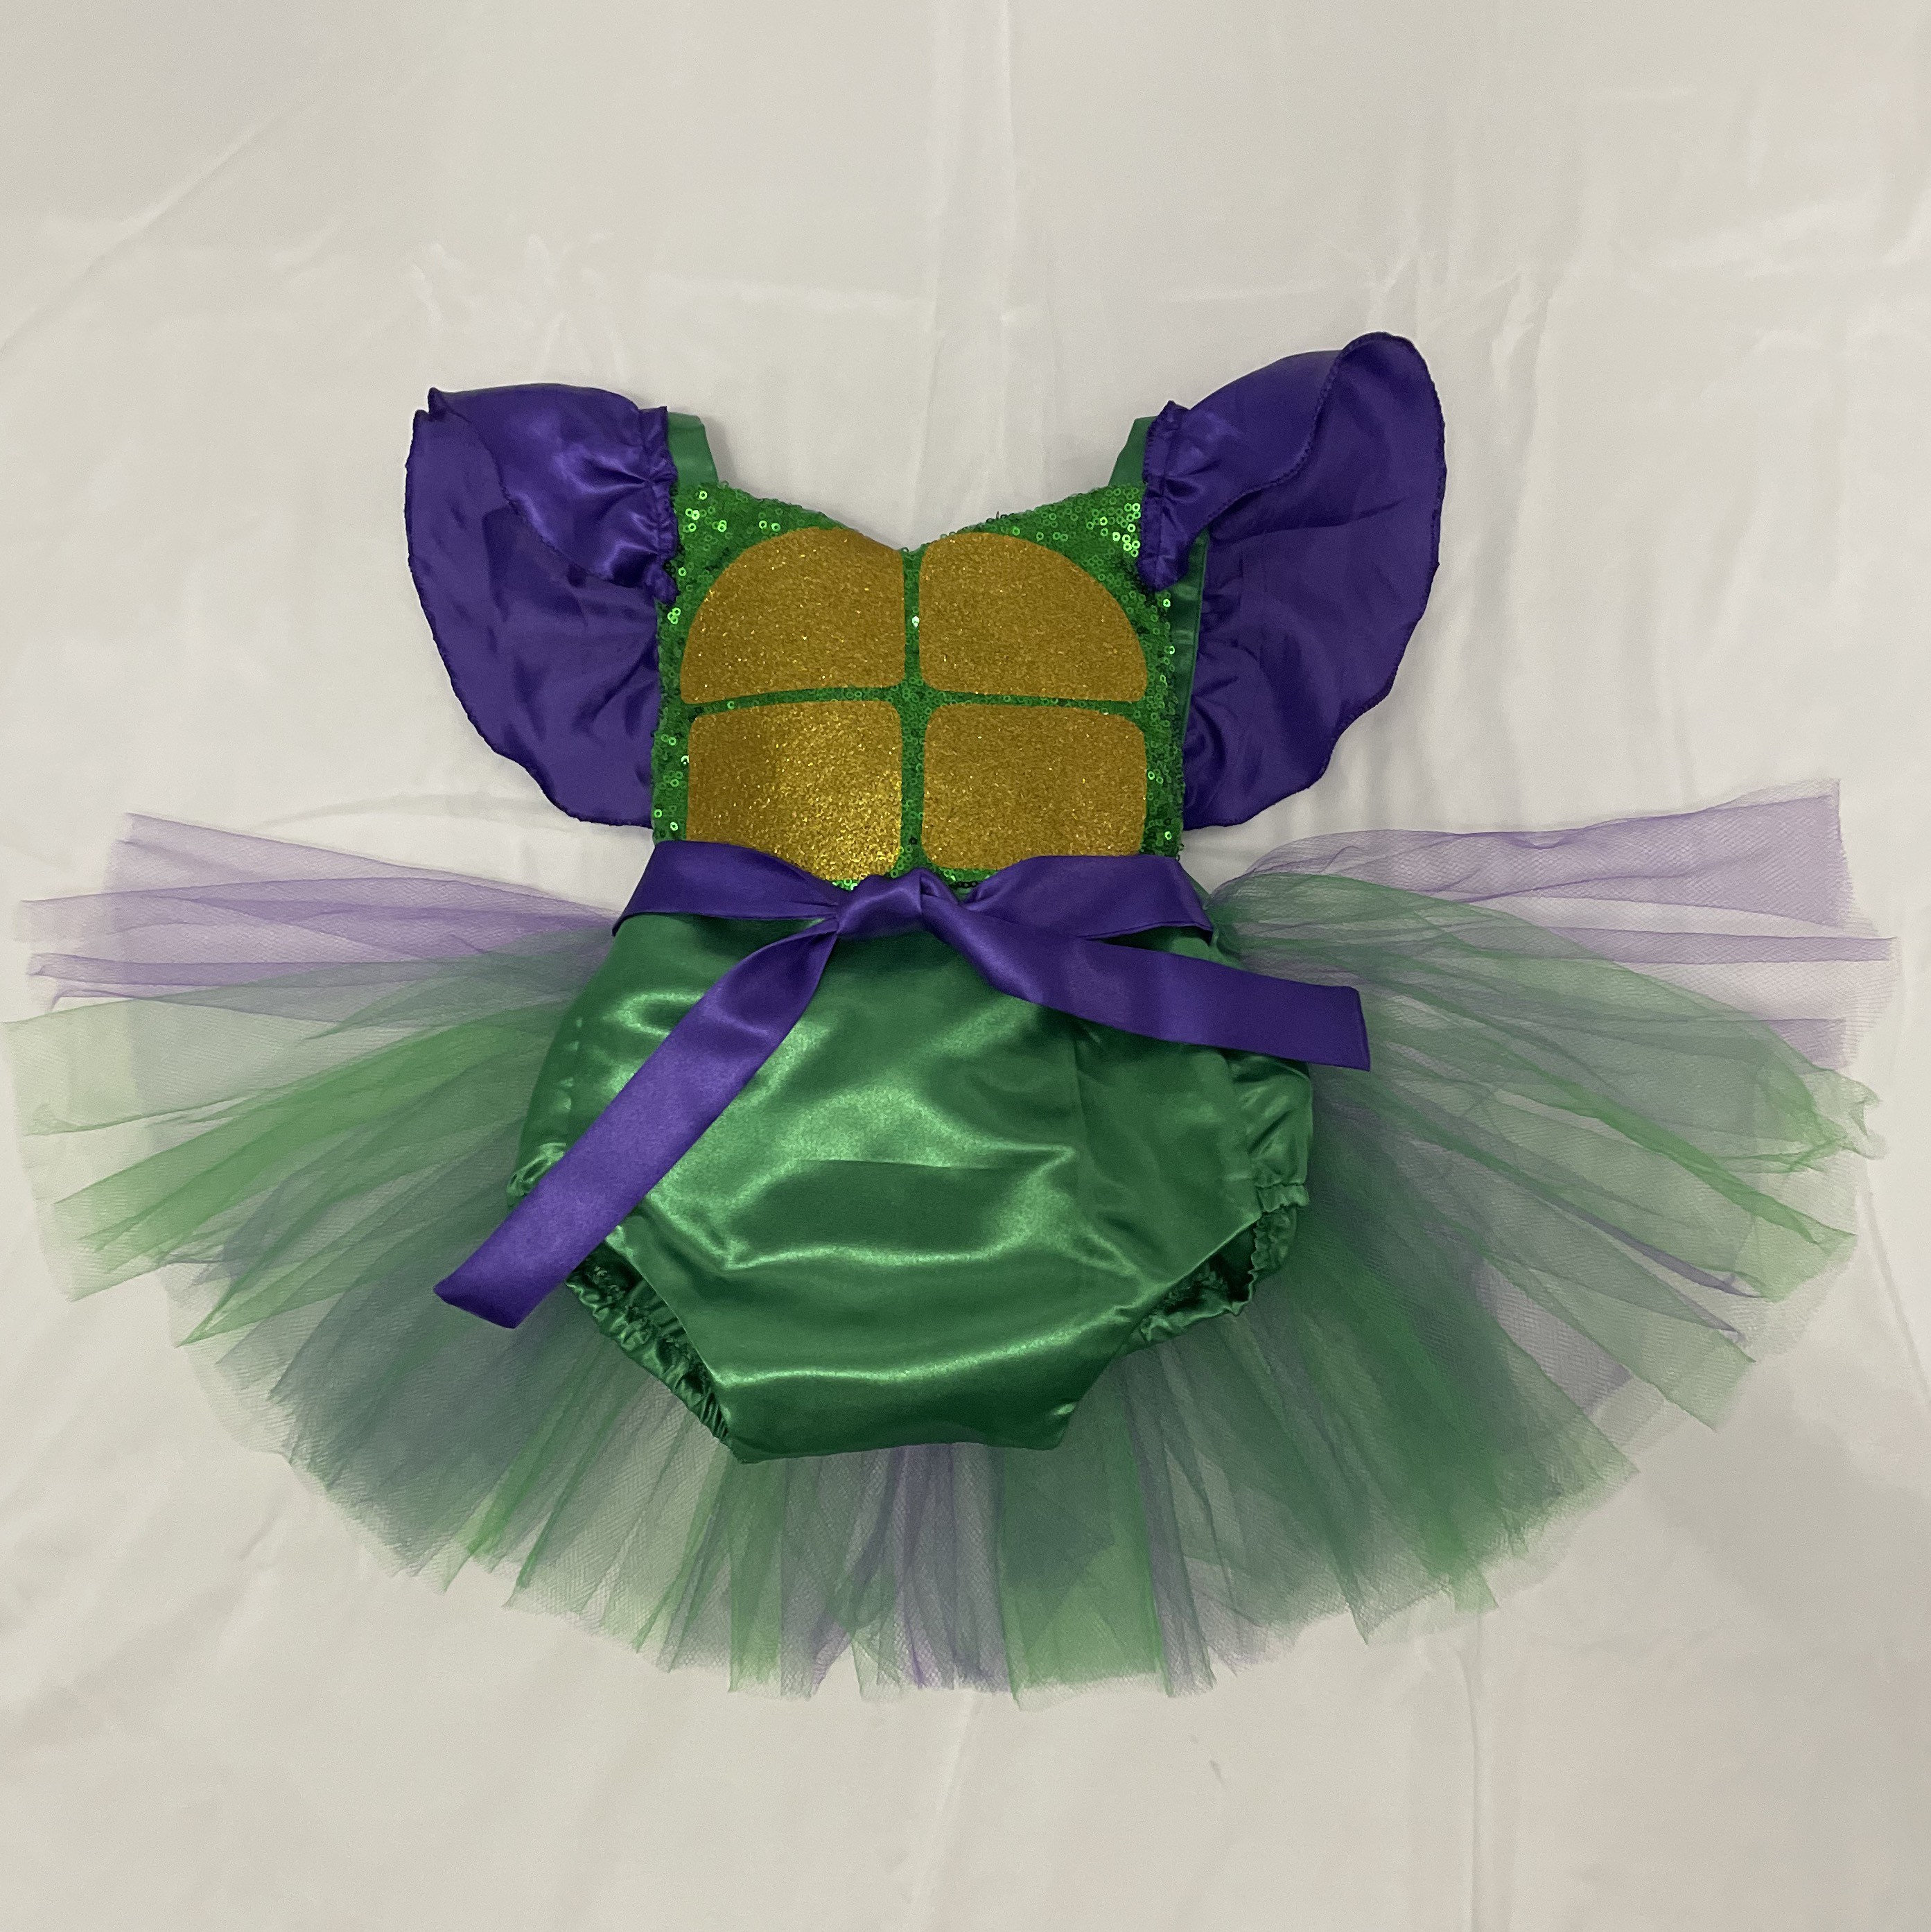 Buttons in a cup mama: Costume de tortue ninja